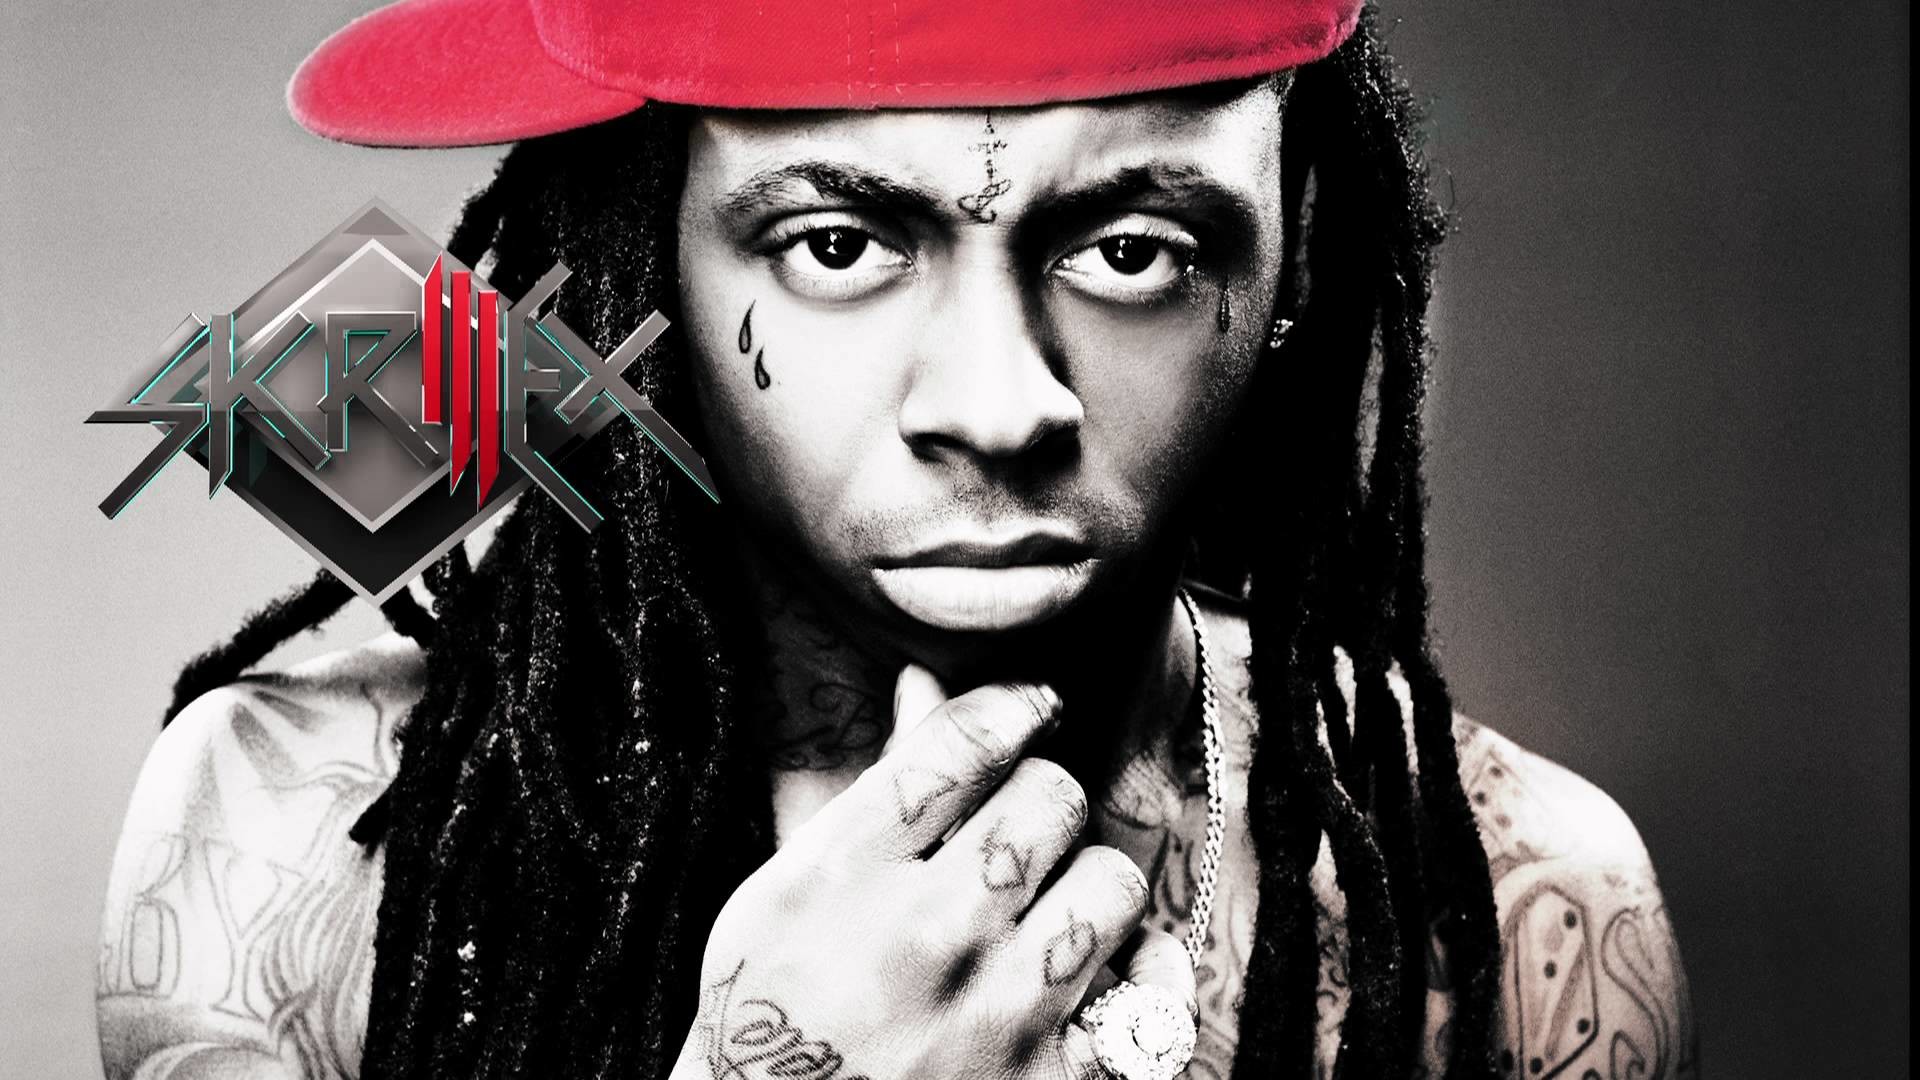 lil wayne hd wallpapers,lip,cool,moustache,photography,singer